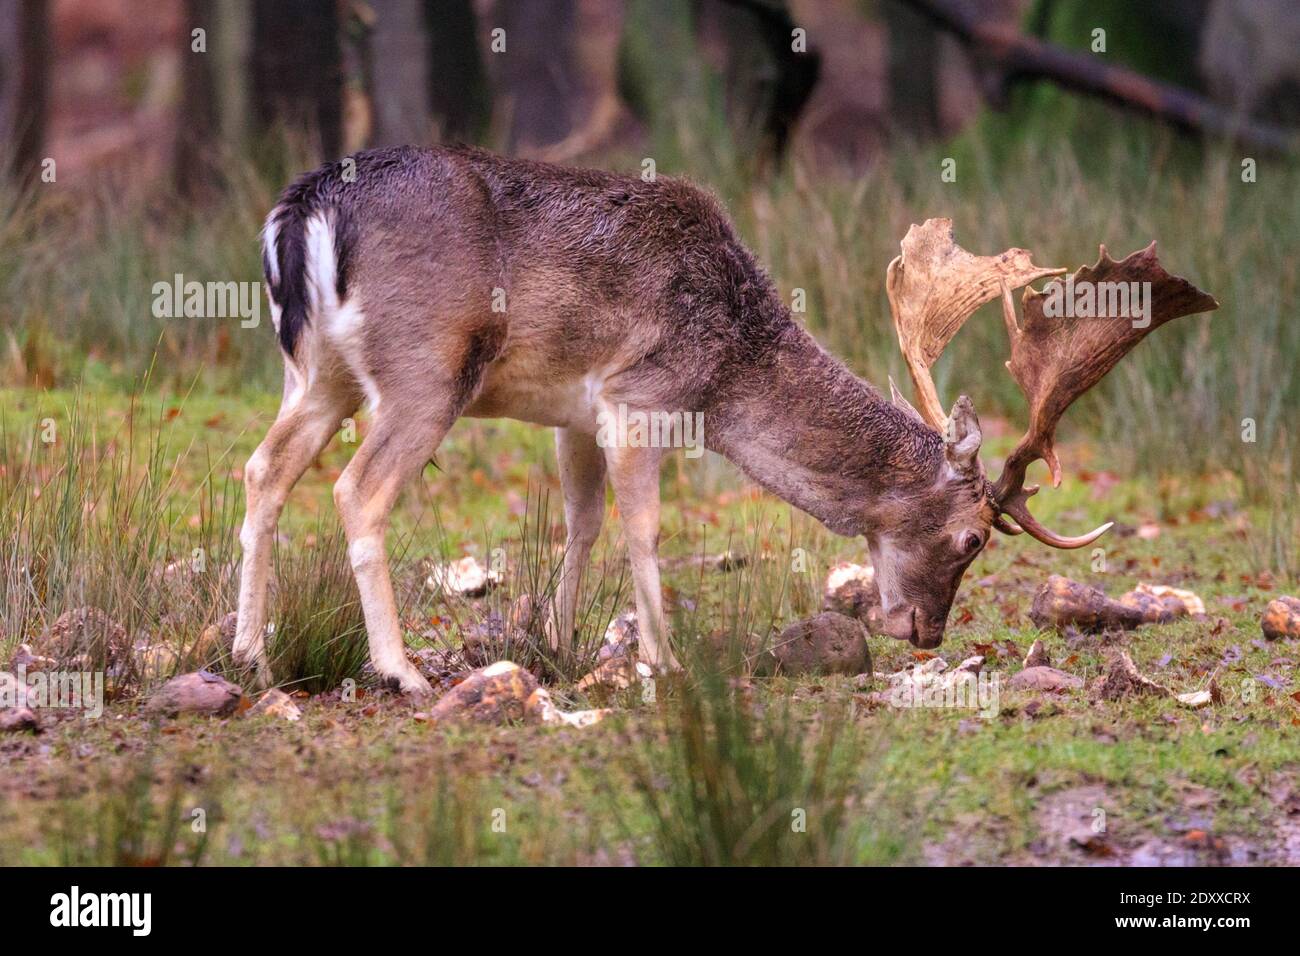 Duelmen, NRW, Germany. 24th Dec, 2020. Christmas dinner - forest rangers have provided some beets and roots to supplement the winter diet as foraging on the forest floor becomes harder. Fallow deer bucks (dama dama) in woodland bring some festive spirit to the Muensterland countryside on a dry but cold Christmas eve. Credit: Imageplotter/Alamy Live News Stock Photo